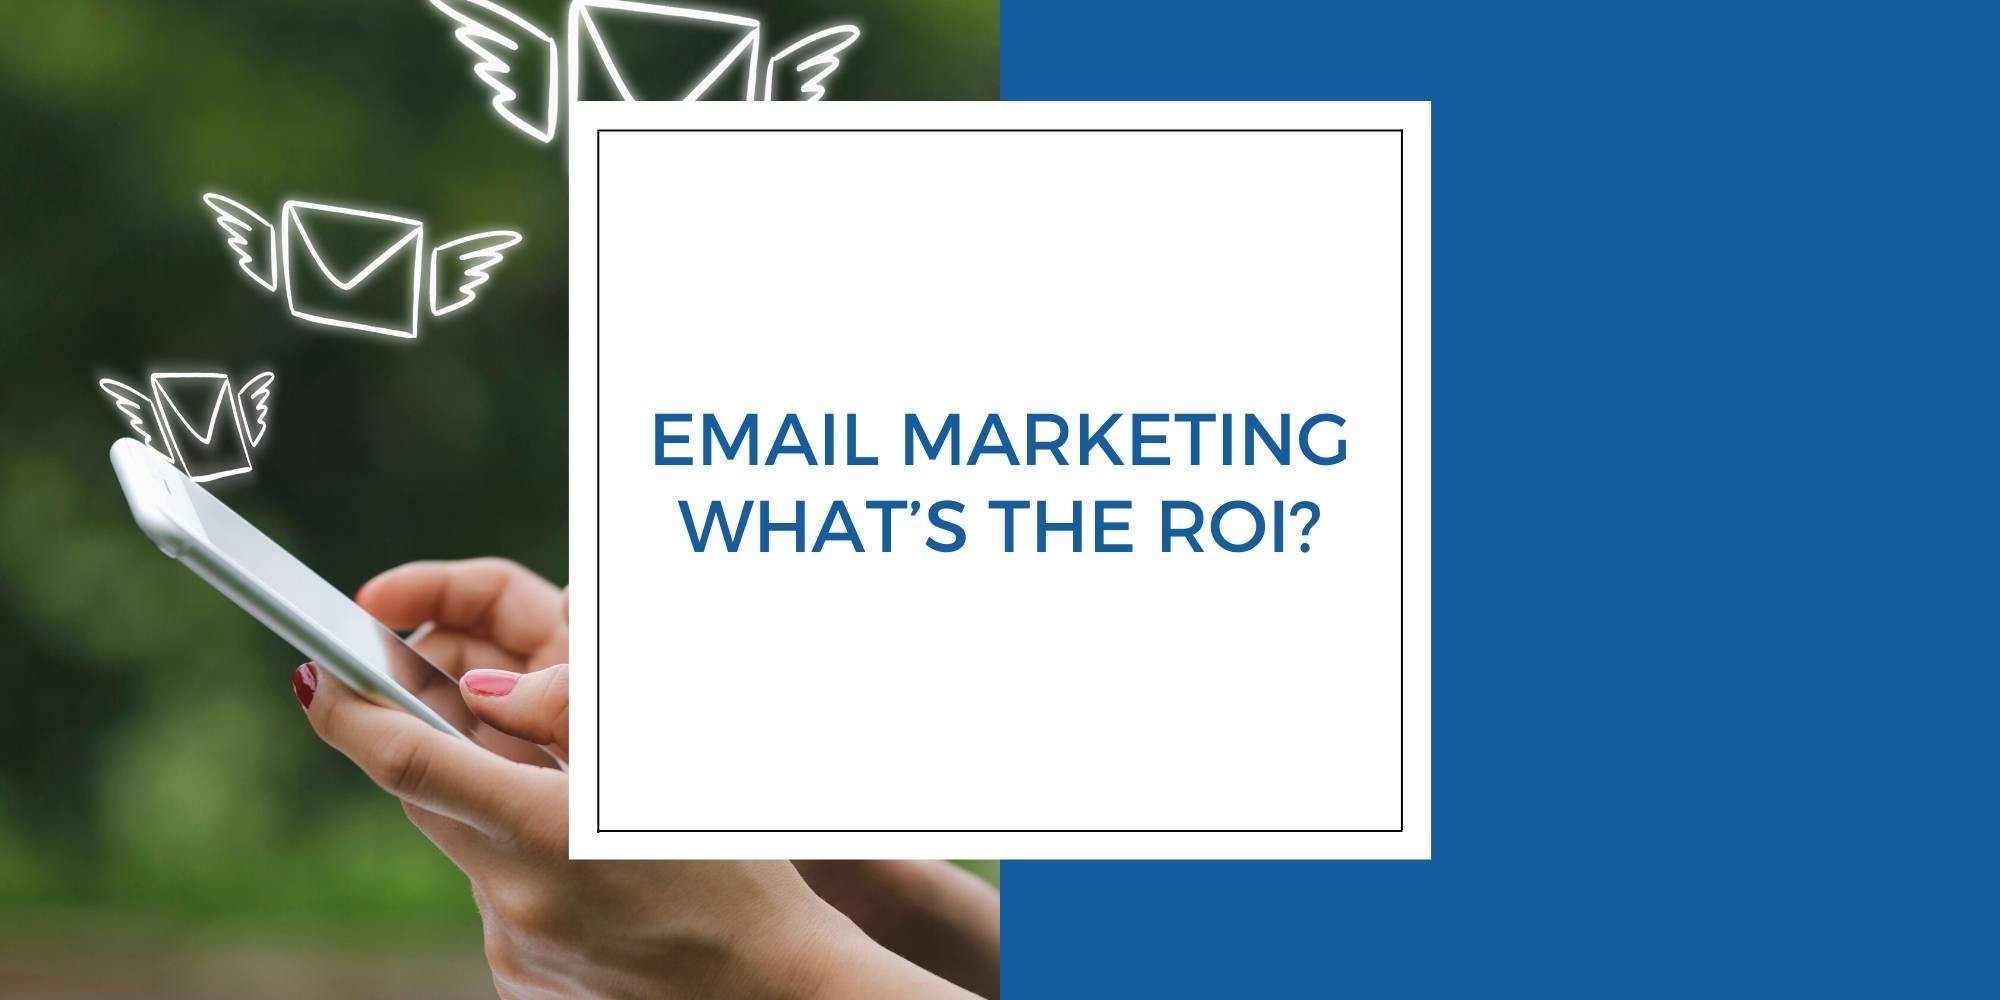 Email Marketing: What's the ROI?